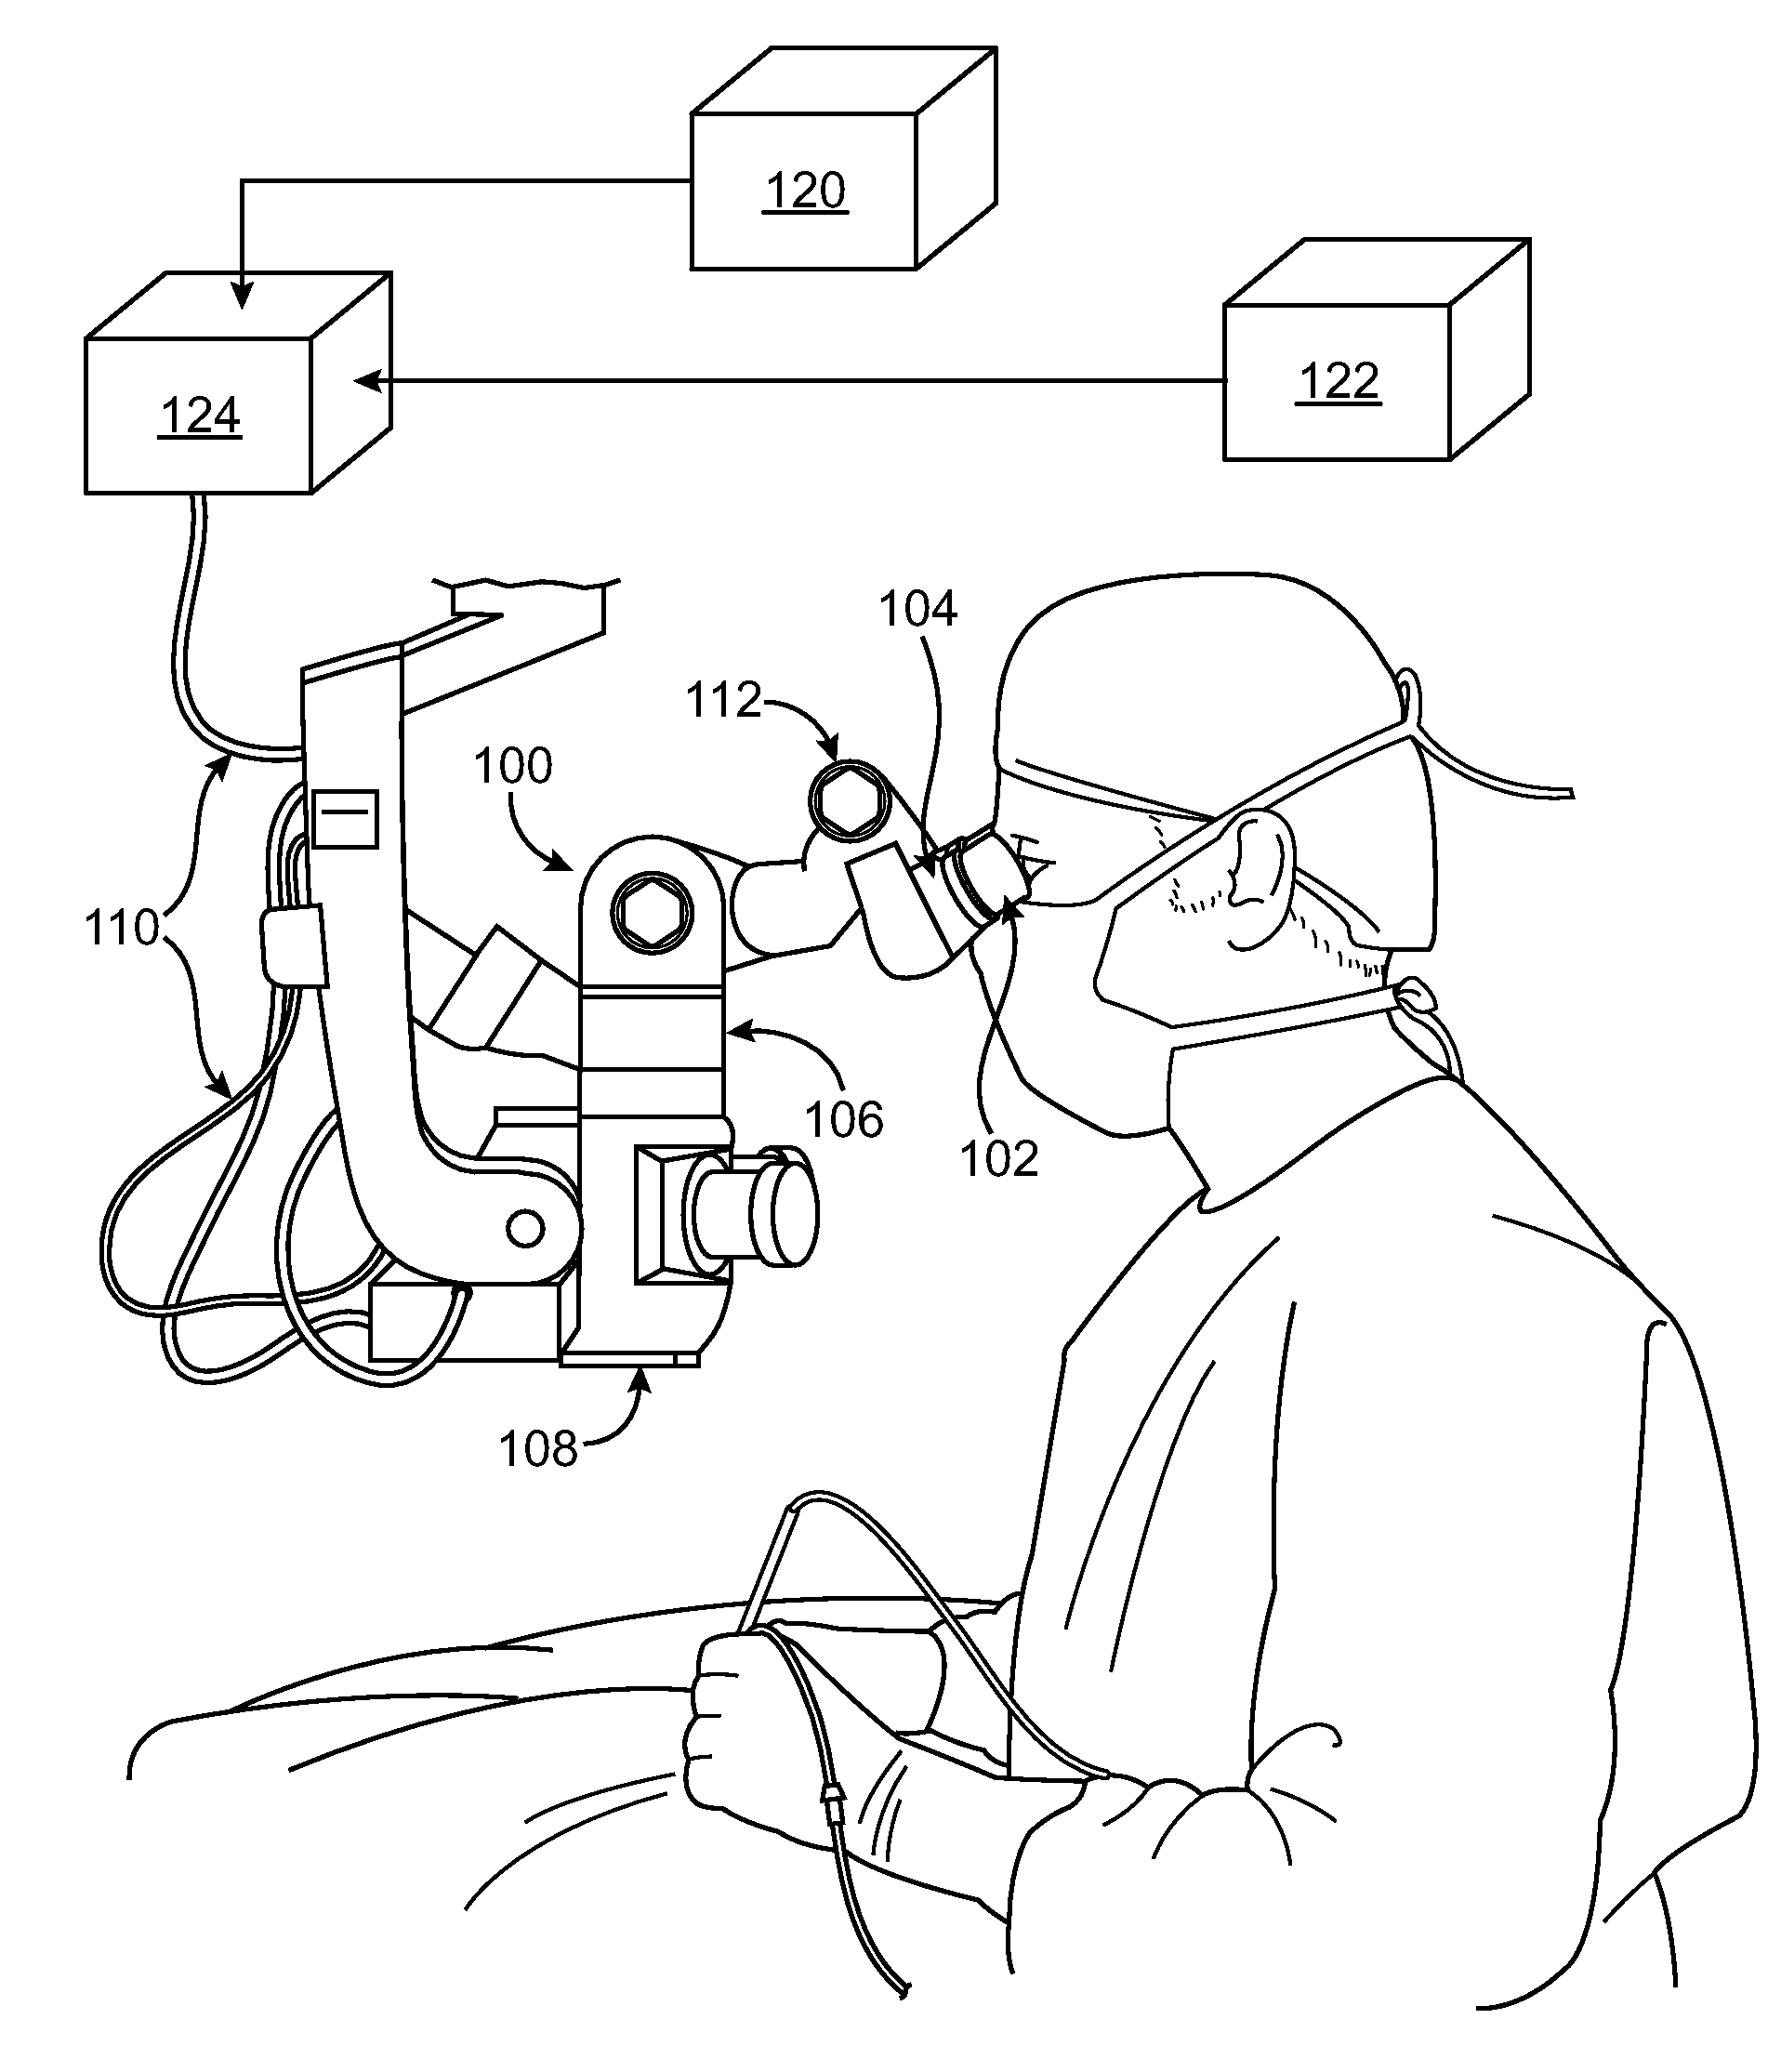 Microscope Viewing Device